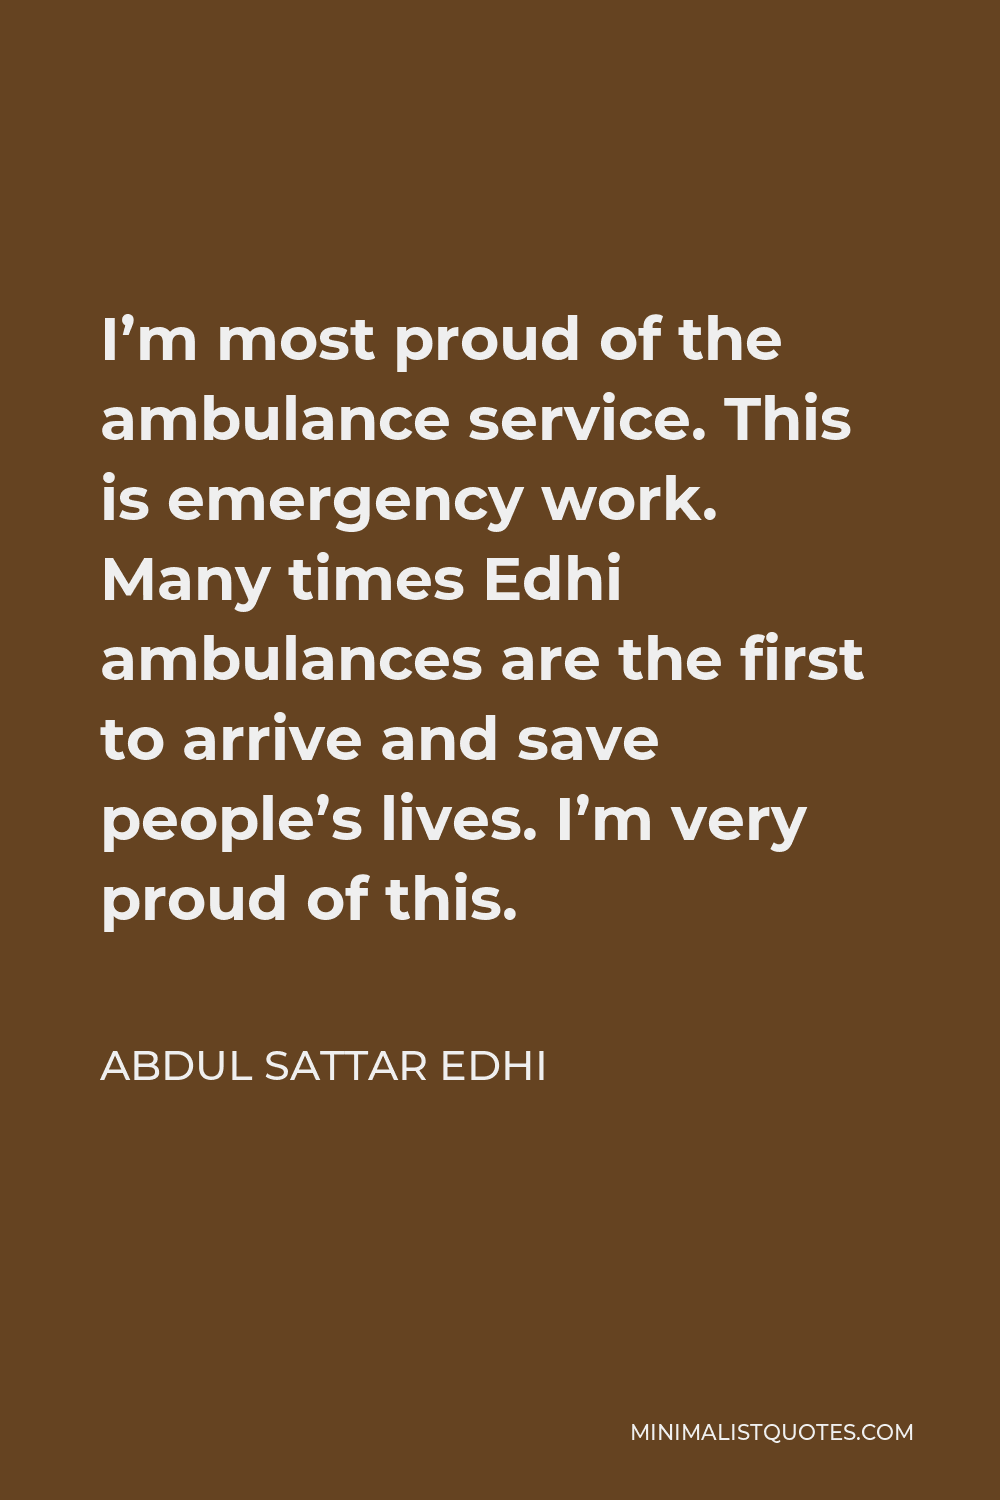 Abdul Sattar Edhi Quote - I’m most proud of the ambulance service. This is emergency work. Many times Edhi ambulances are the first to arrive and save people’s lives. I’m very proud of this.